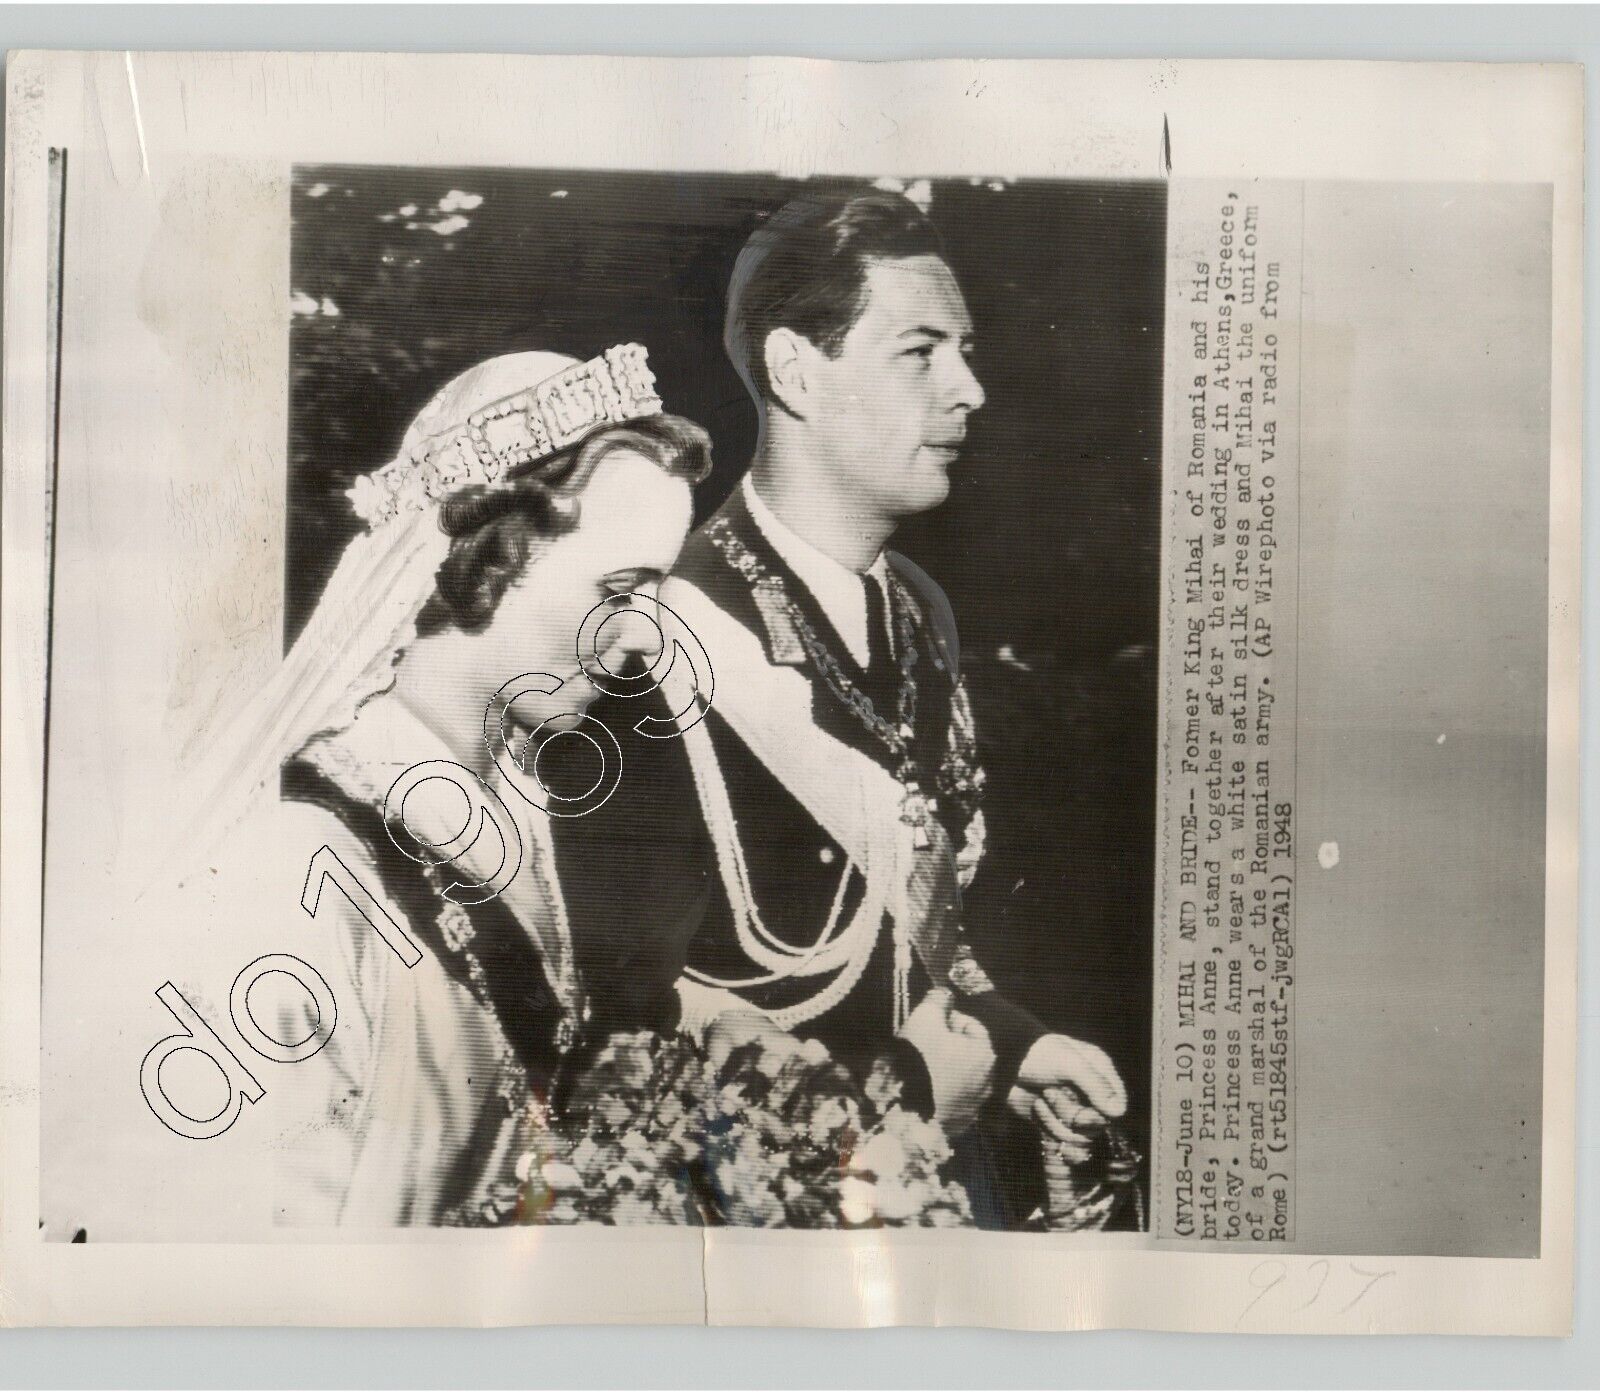 KING MIHAI of ROMANIA Marries PRINCESS ANNE in Athens GREECE 1948 Press Photo